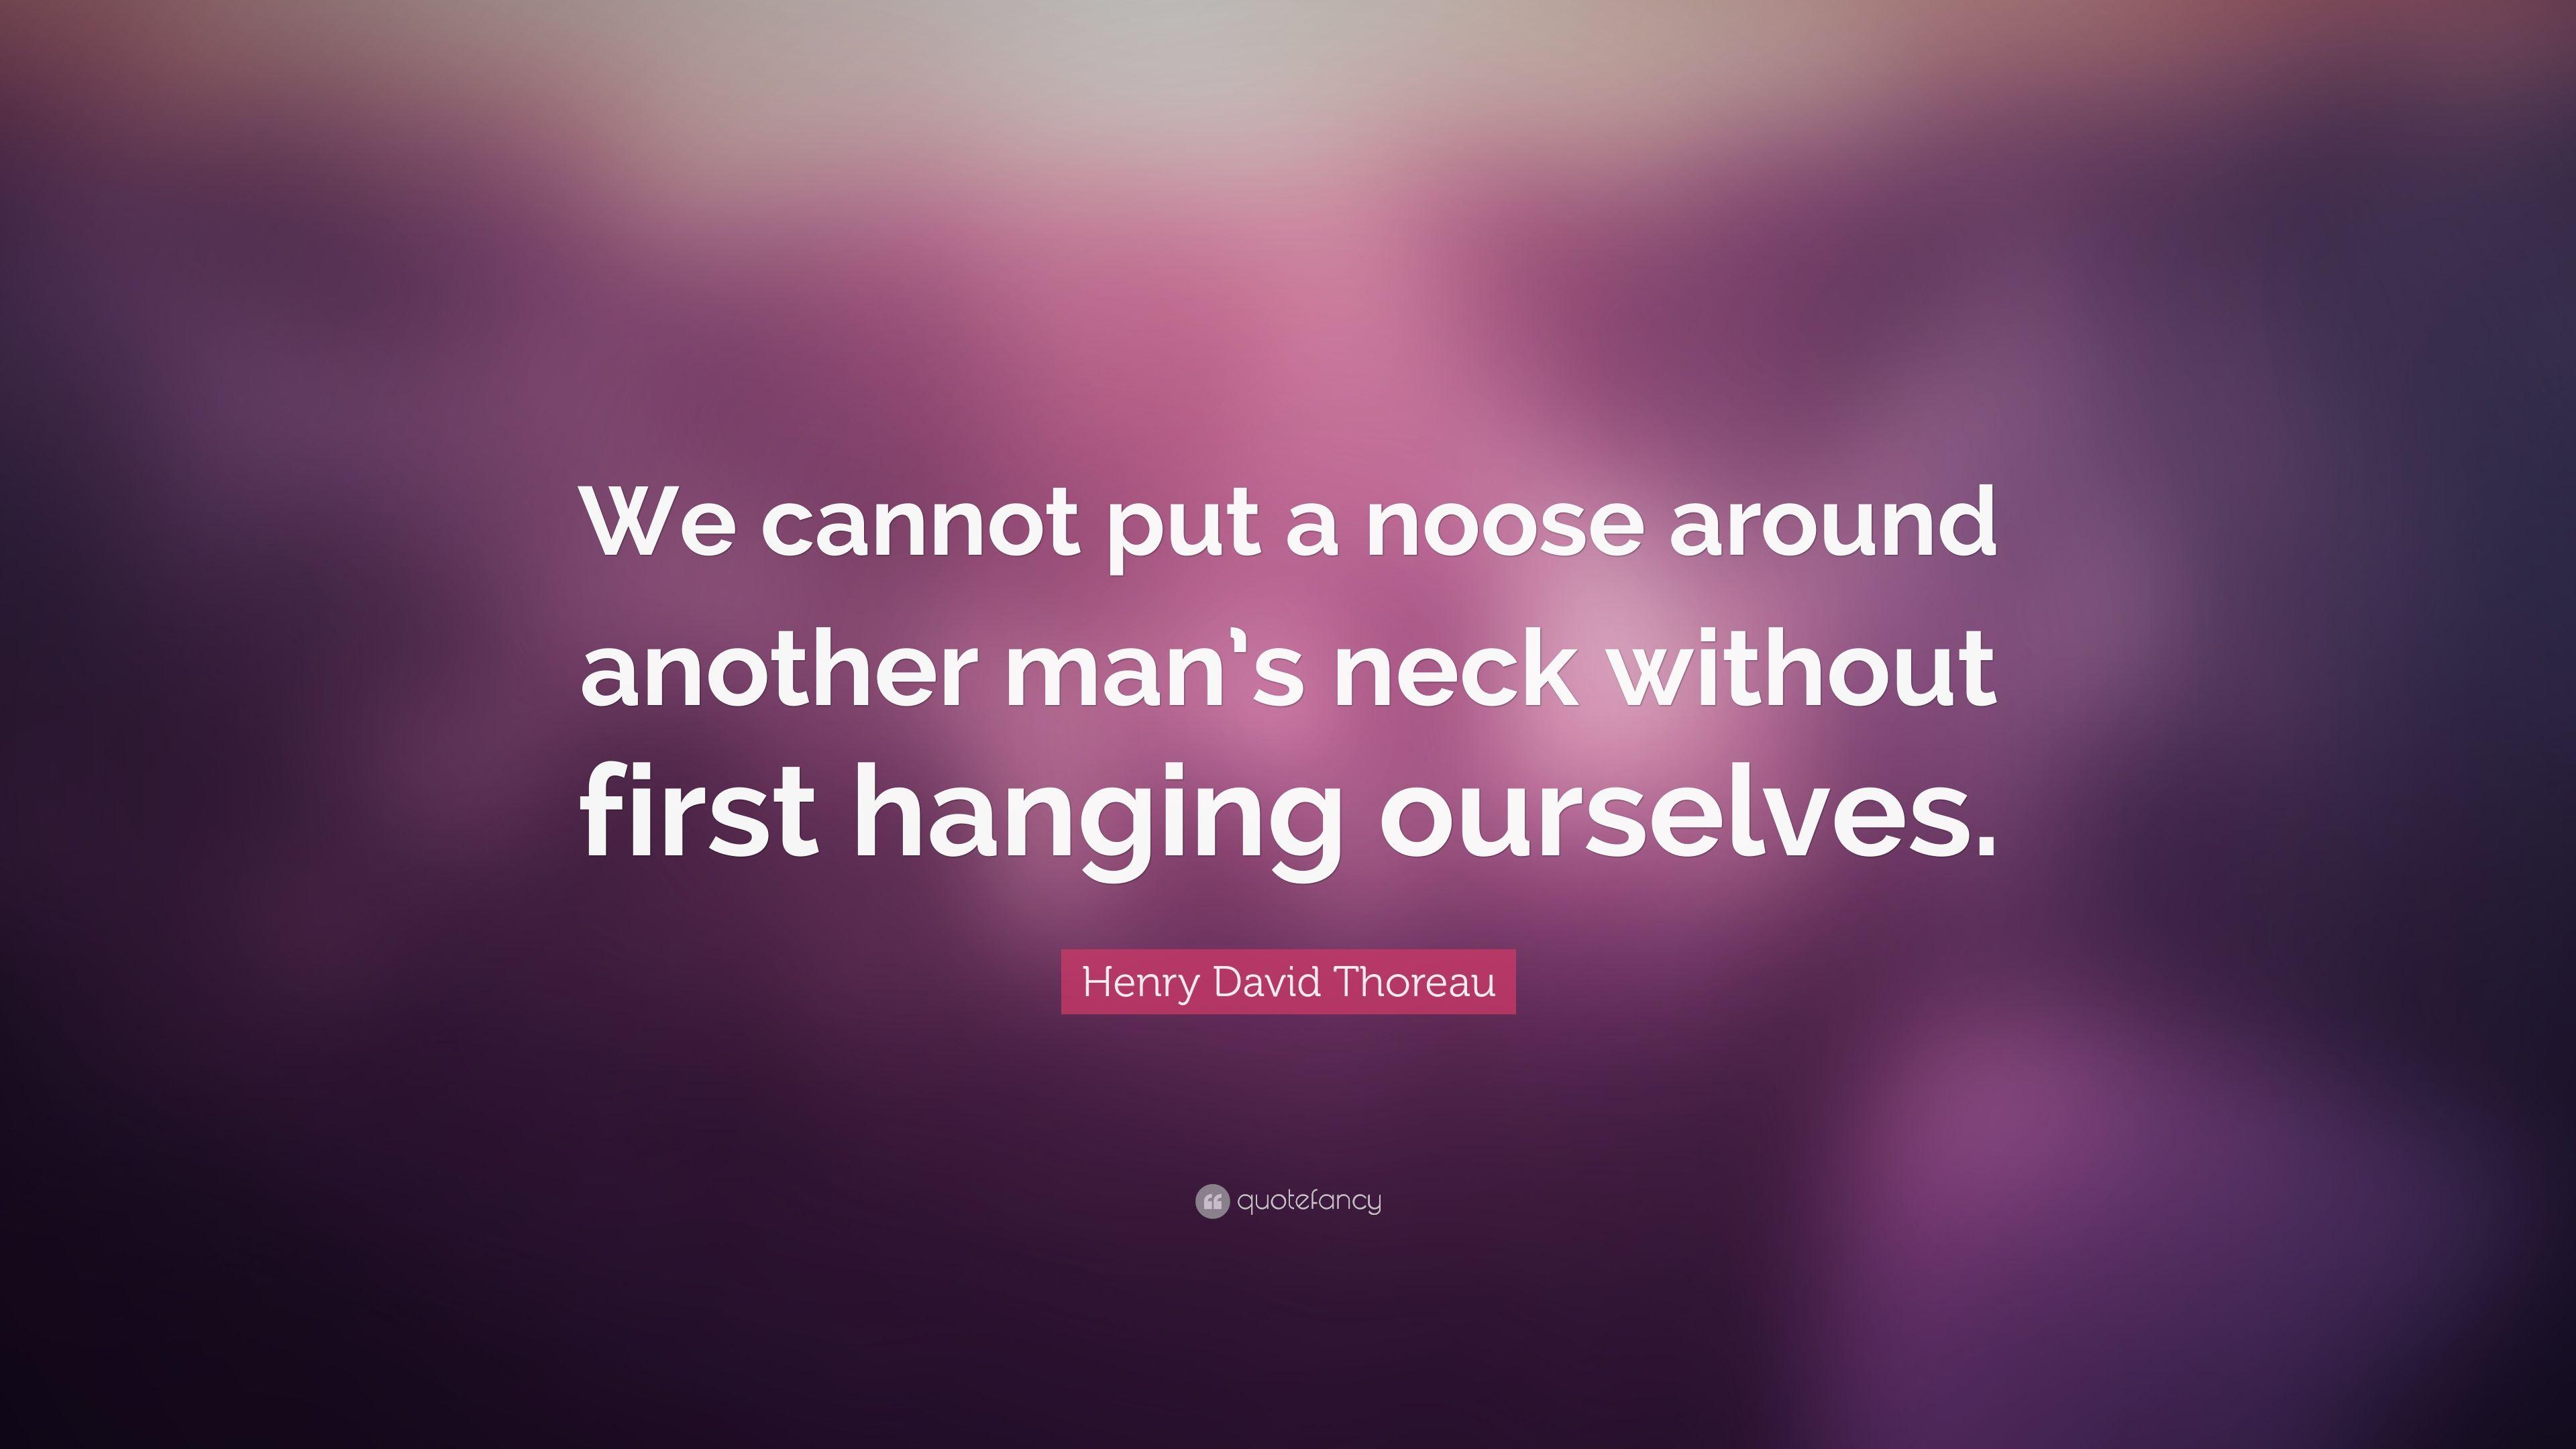 Henry David Thoreau Quote: “We cannot put a noose around another